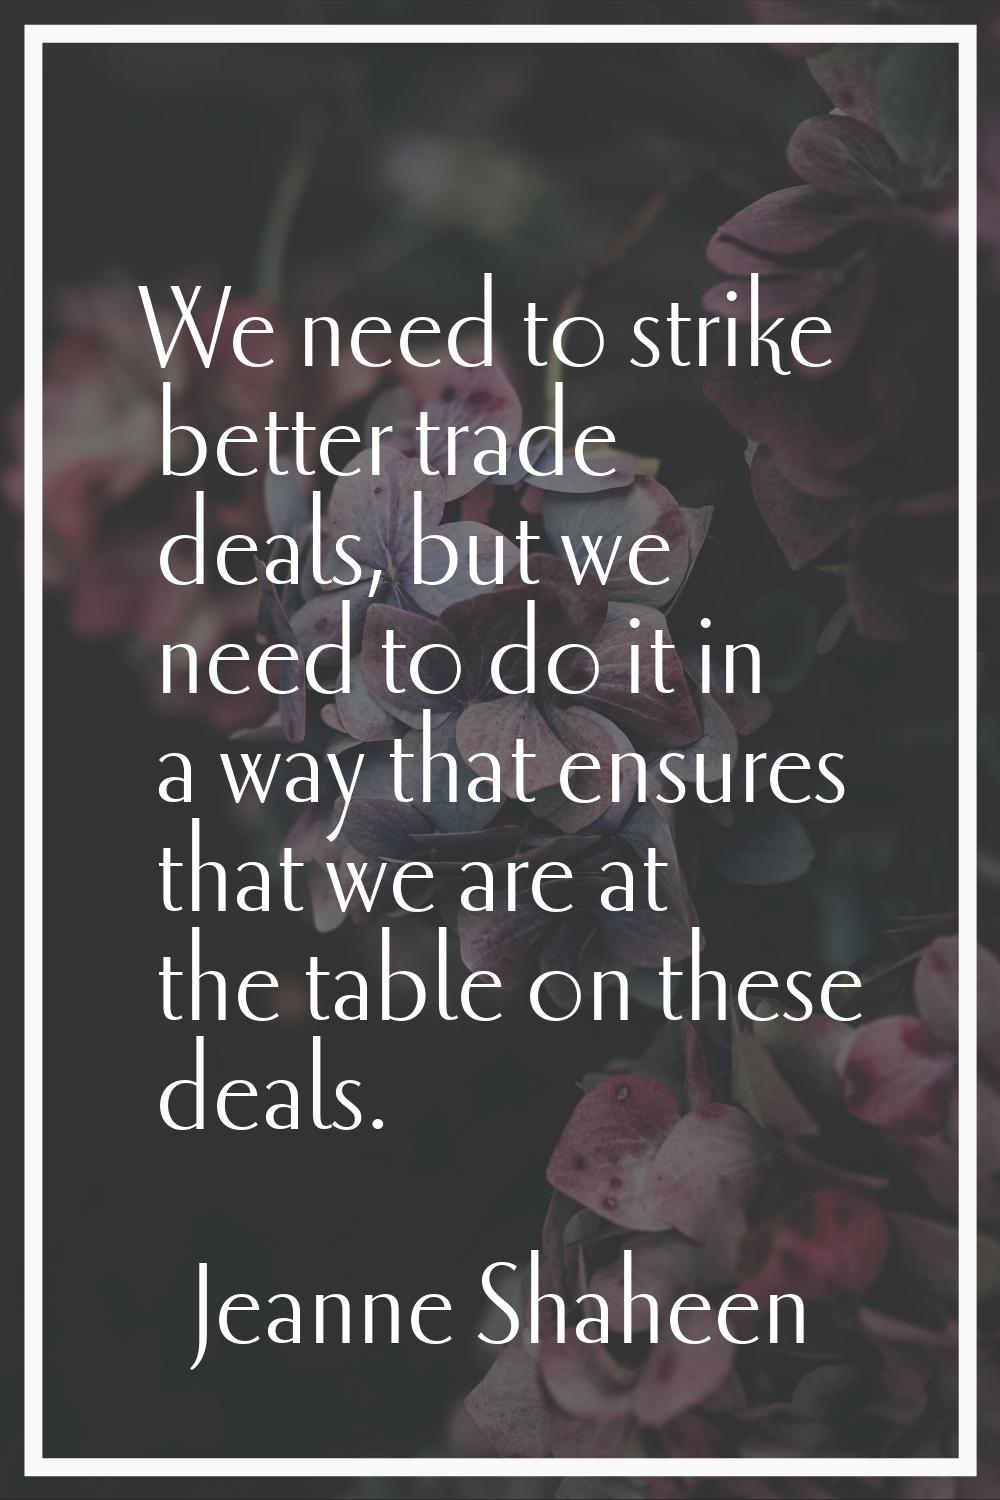 We need to strike better trade deals, but we need to do it in a way that ensures that we are at the